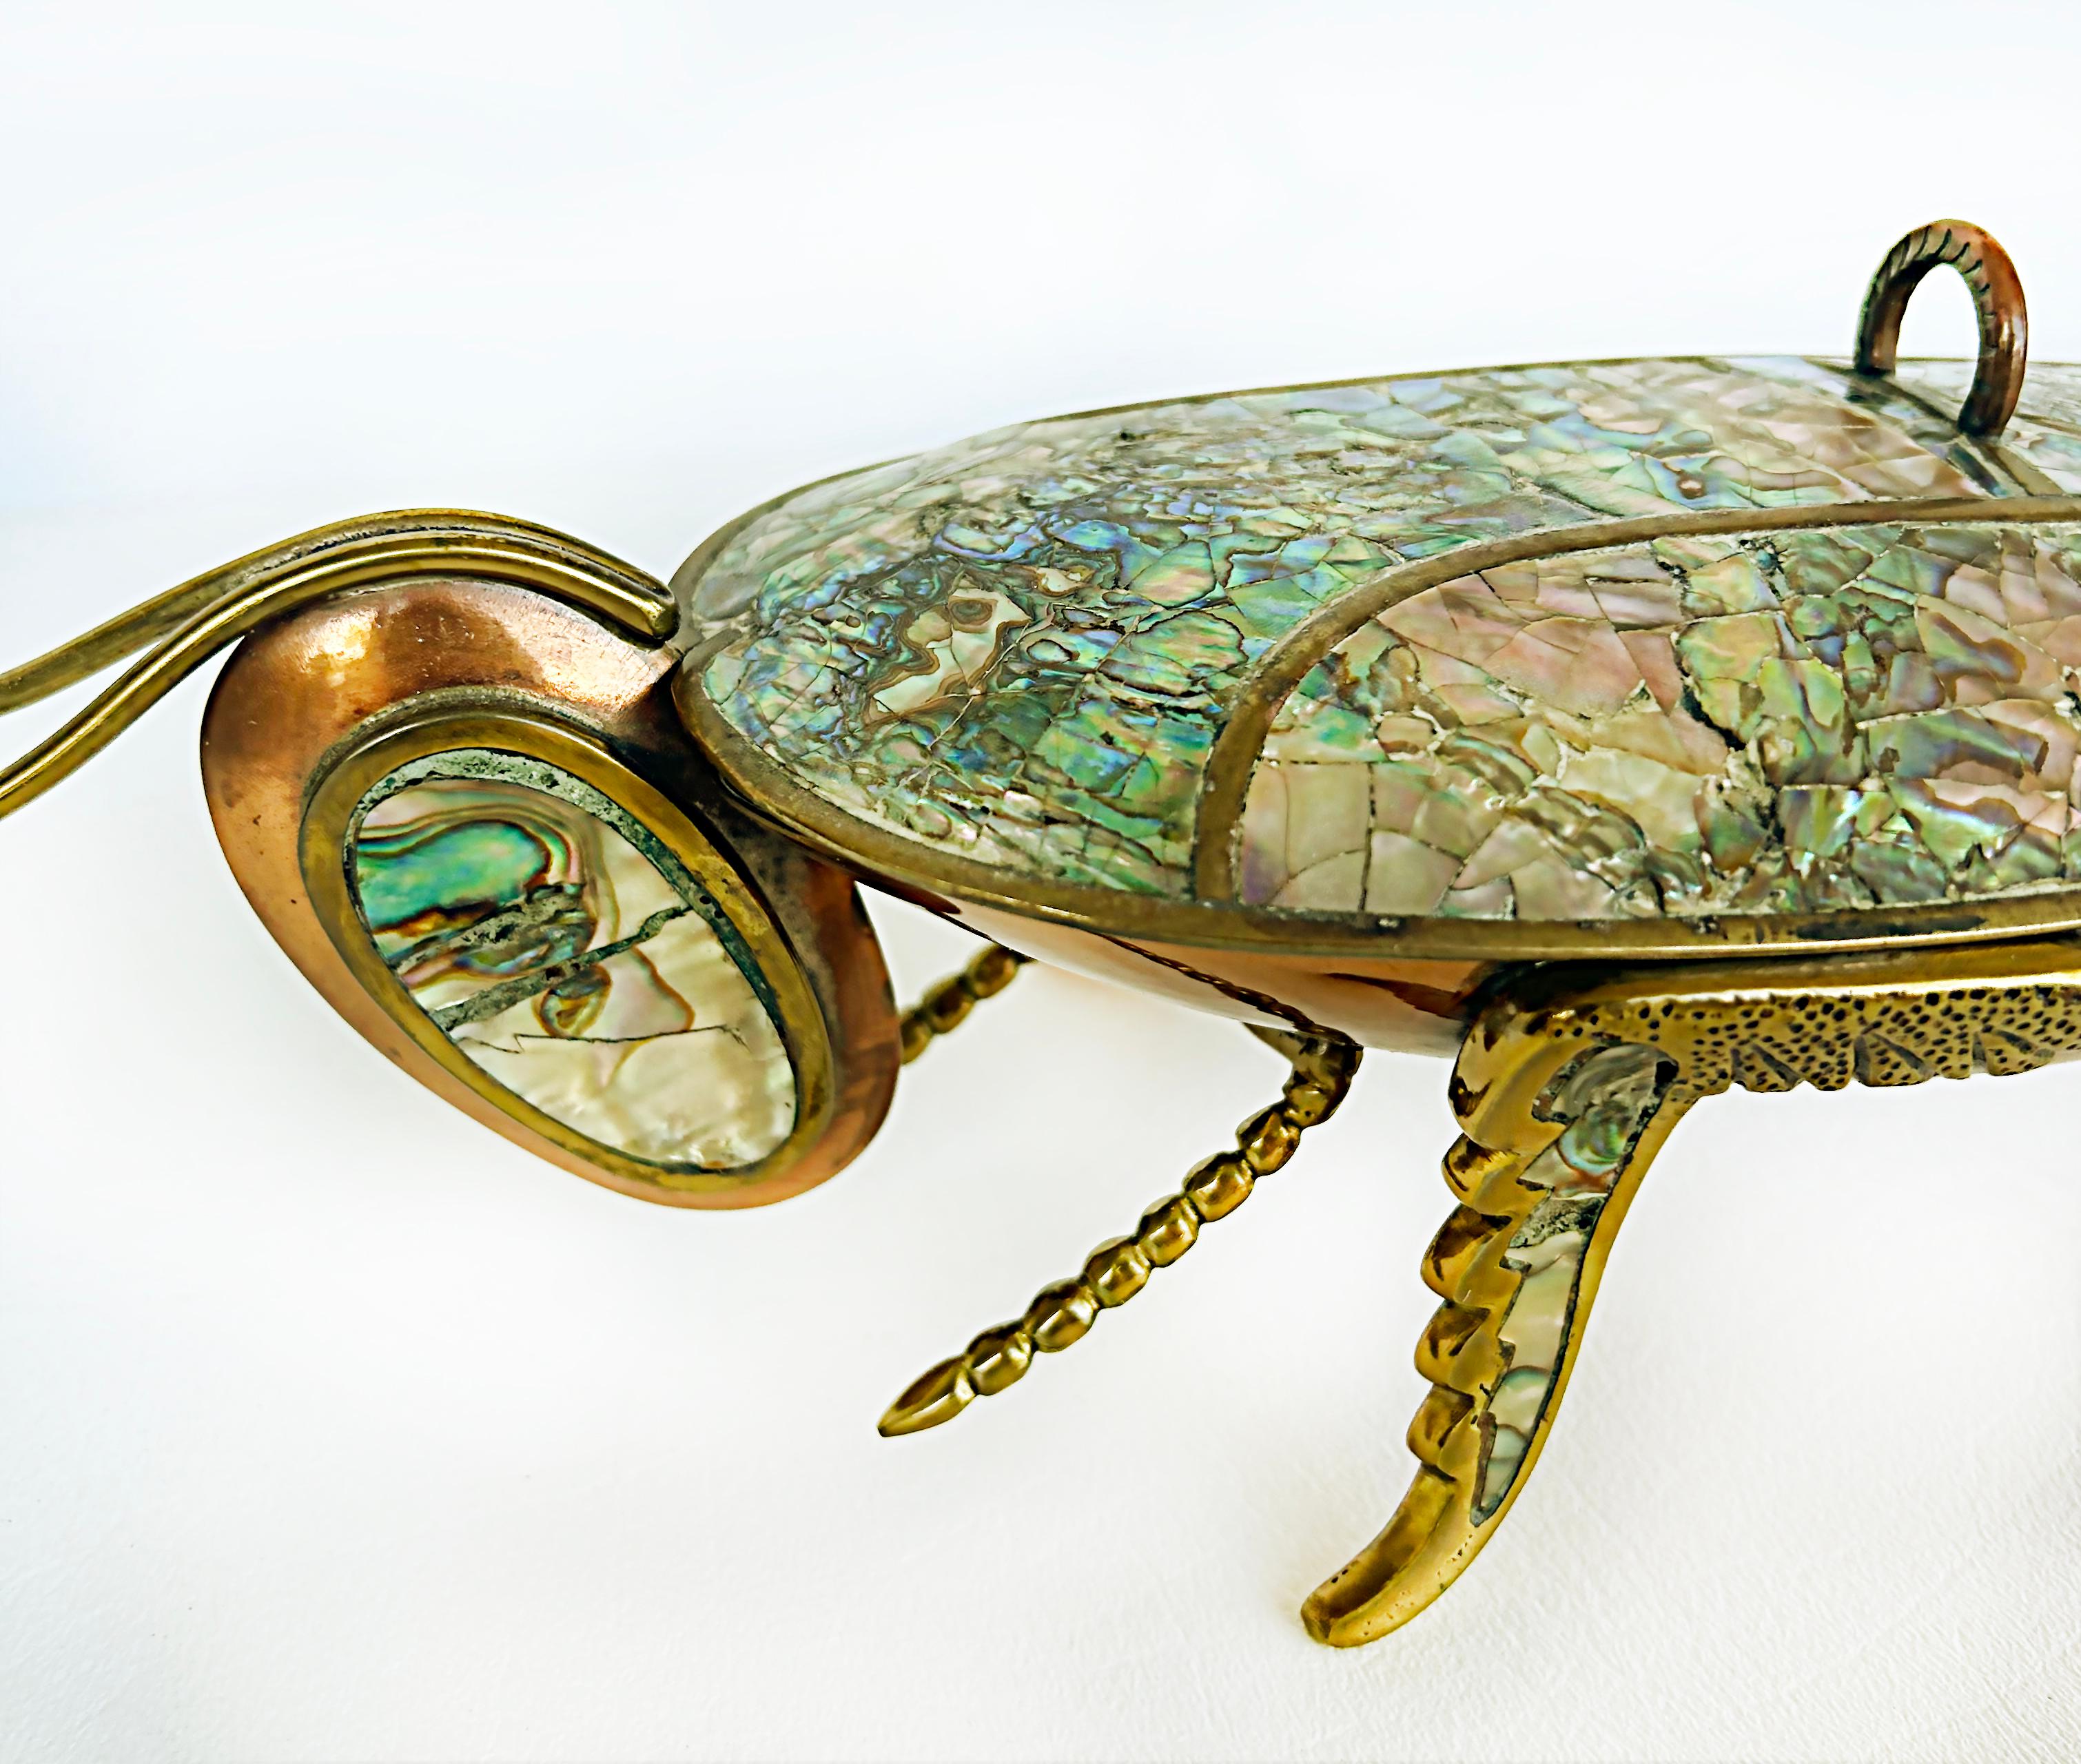 60s Mexican Mid-Century Abalone Shell Grasshopper Tray with Lid, Mixed Metals In Good Condition For Sale In Miami, FL